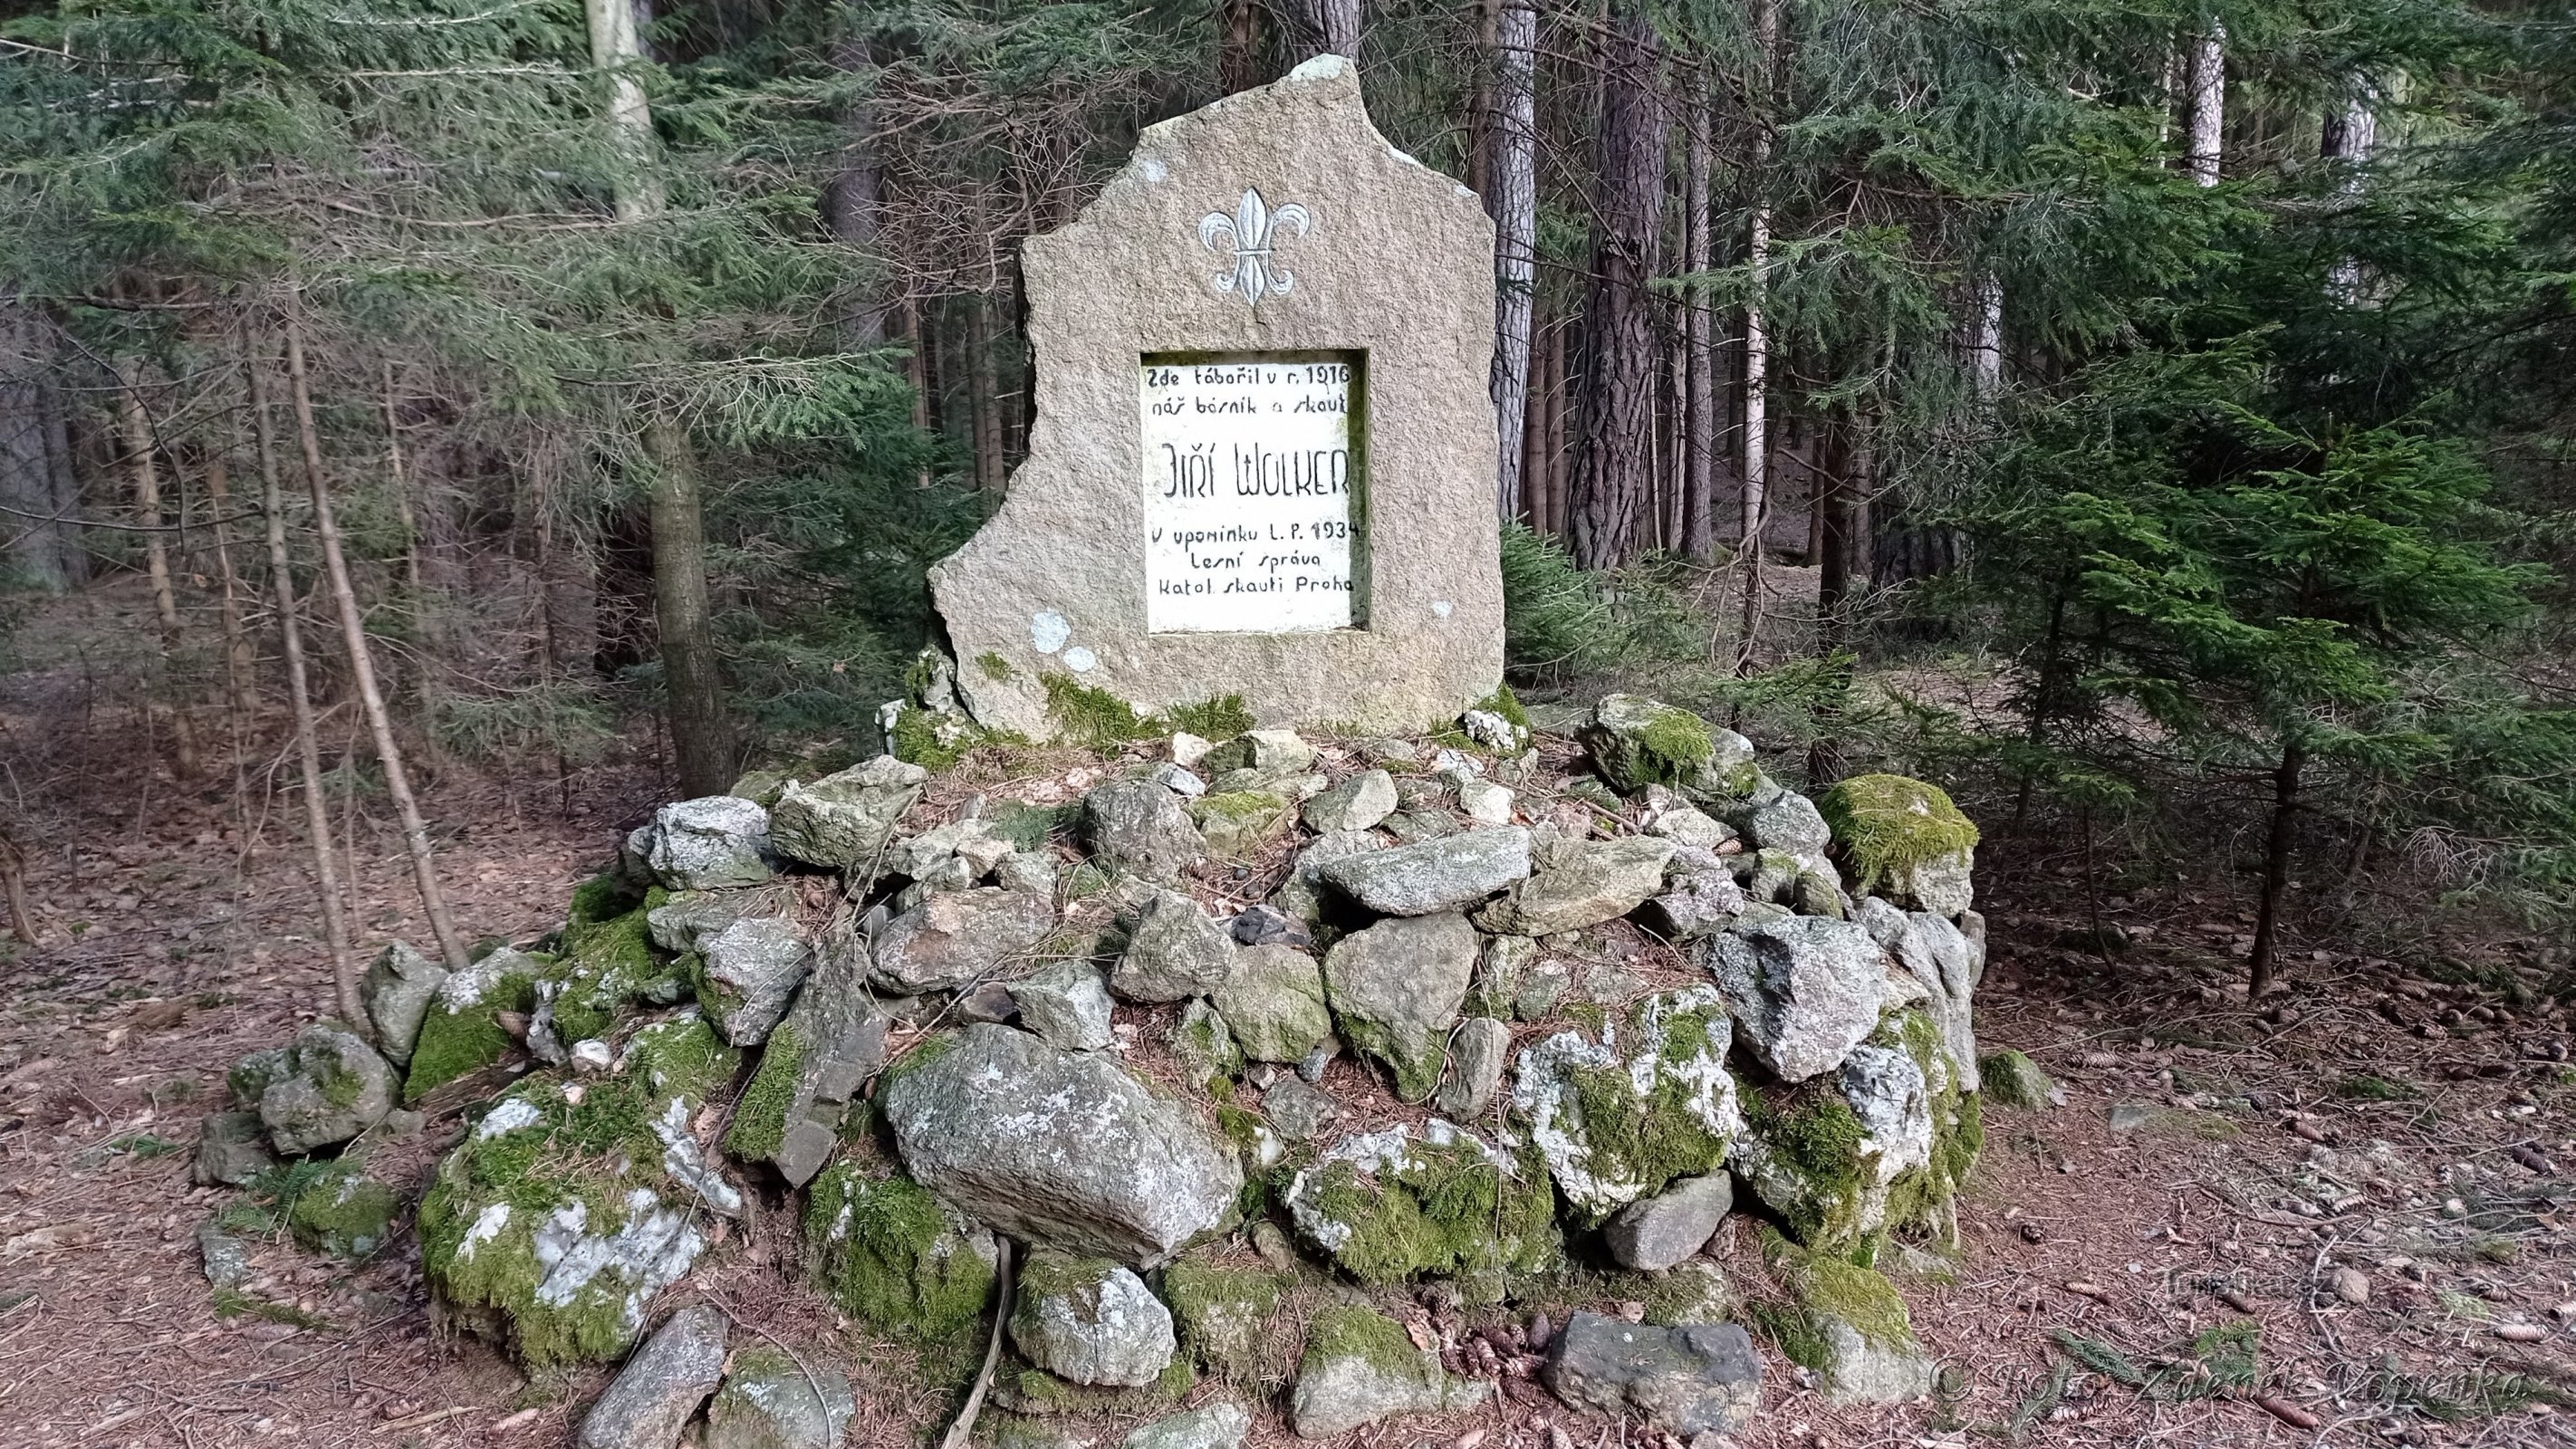 Monument to J. Wolker.